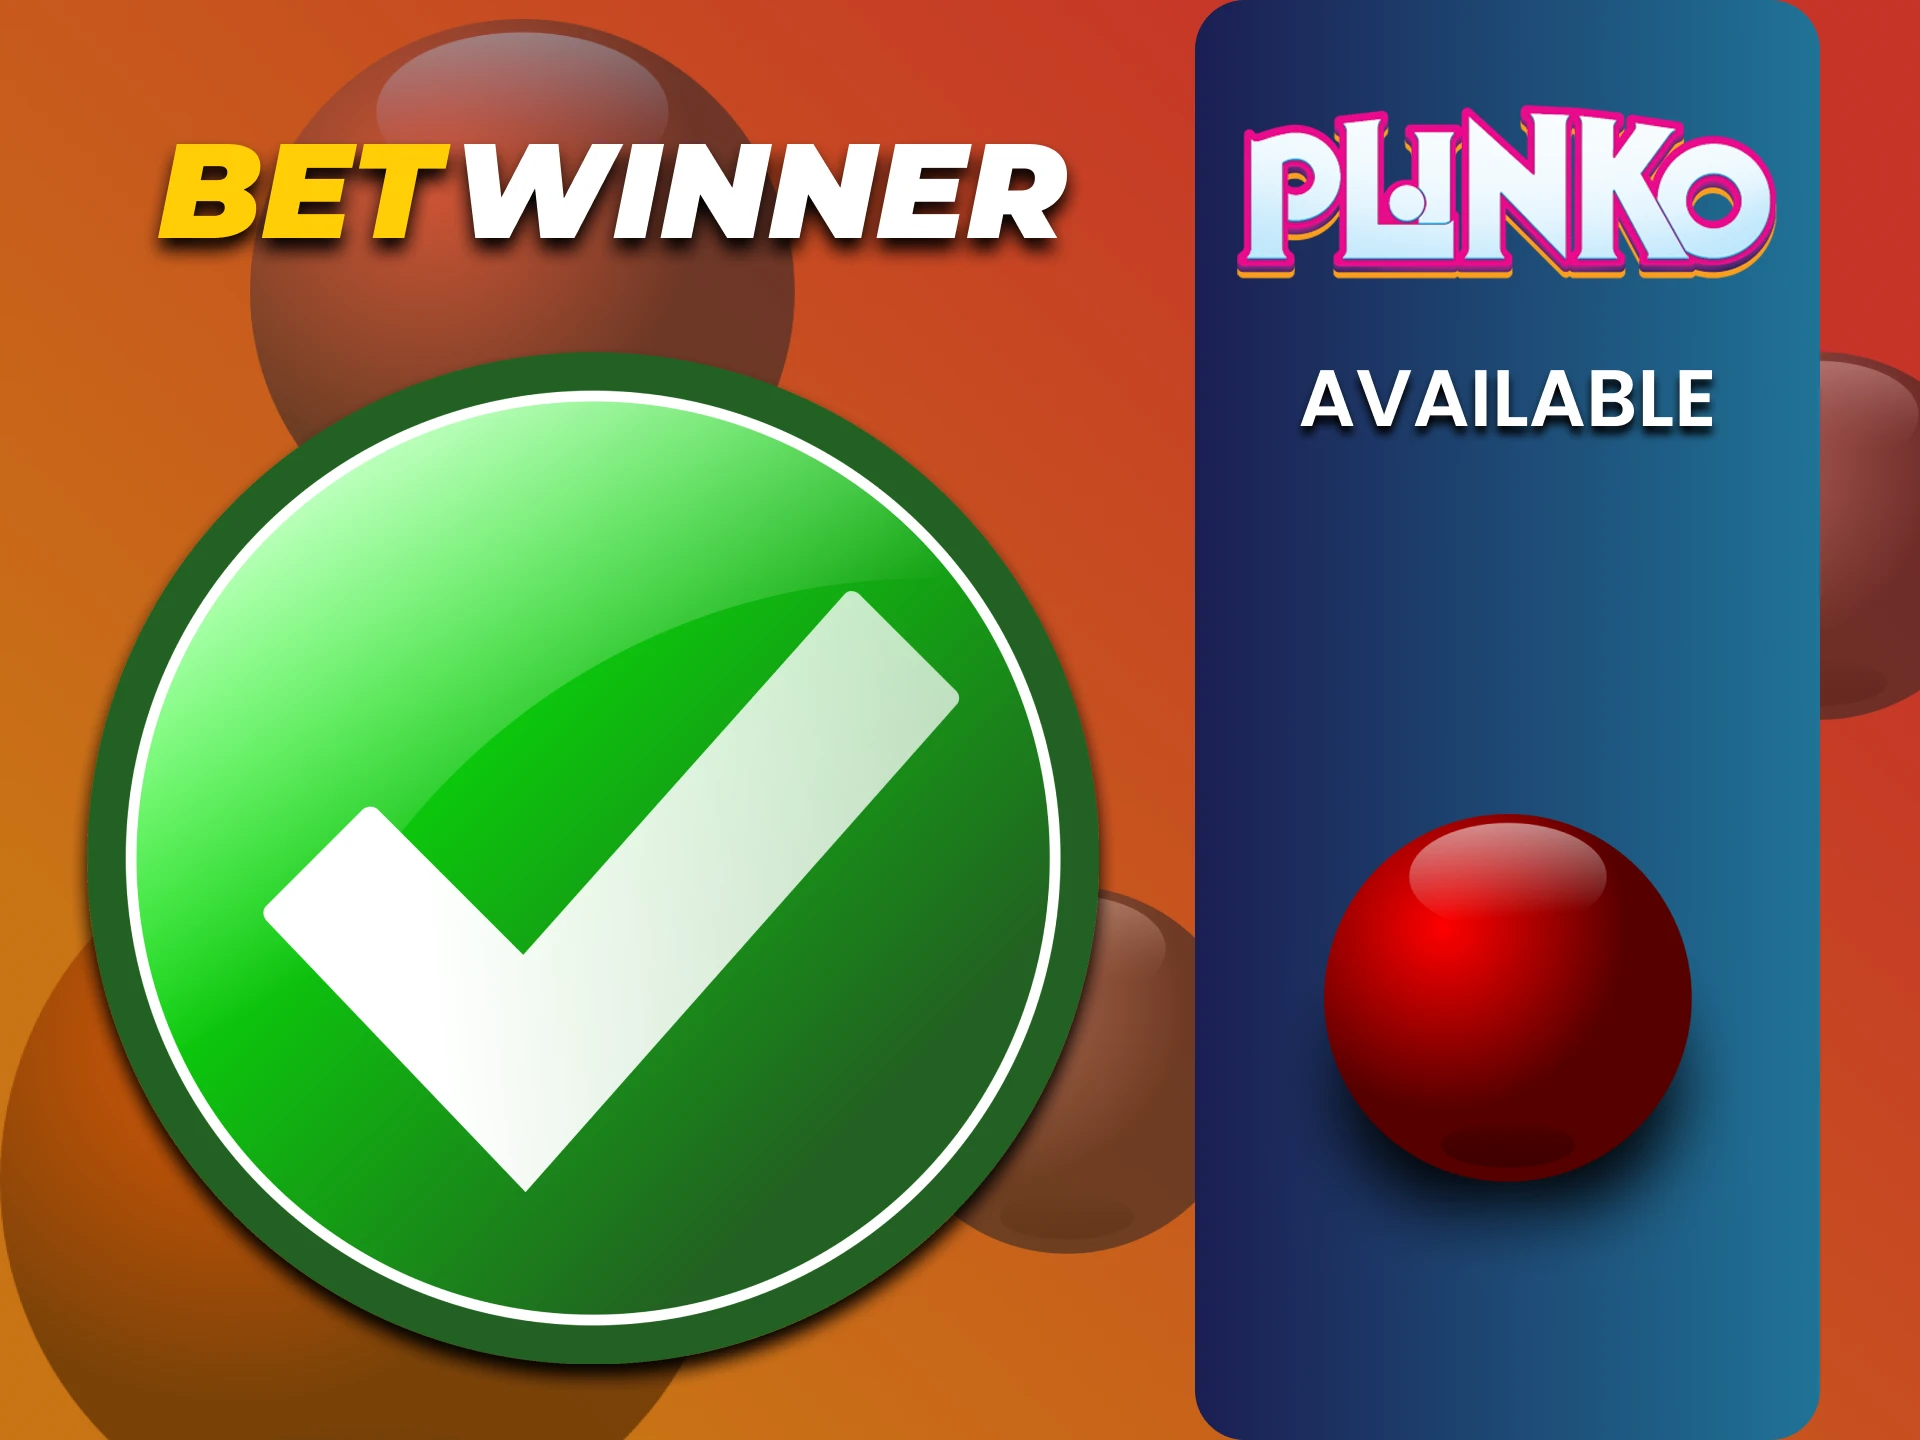 We will tell you what types of Plinko are available on the Betwinner website.